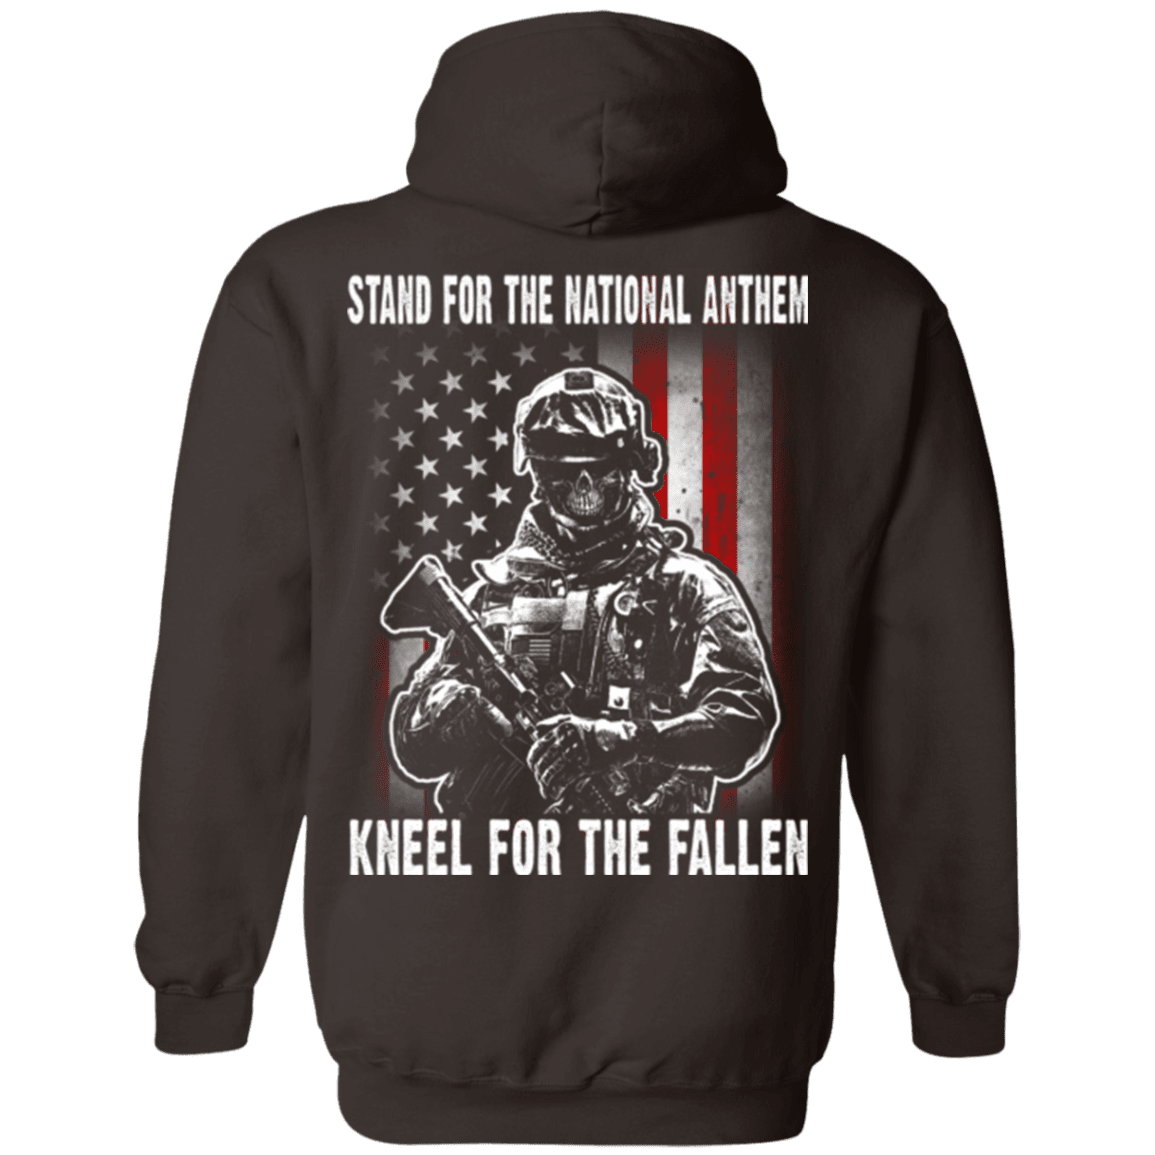 Military T-Shirt "Veteran - Stand For The National Anthem Kneel For The Fallen"-TShirt-General-Veterans Nation